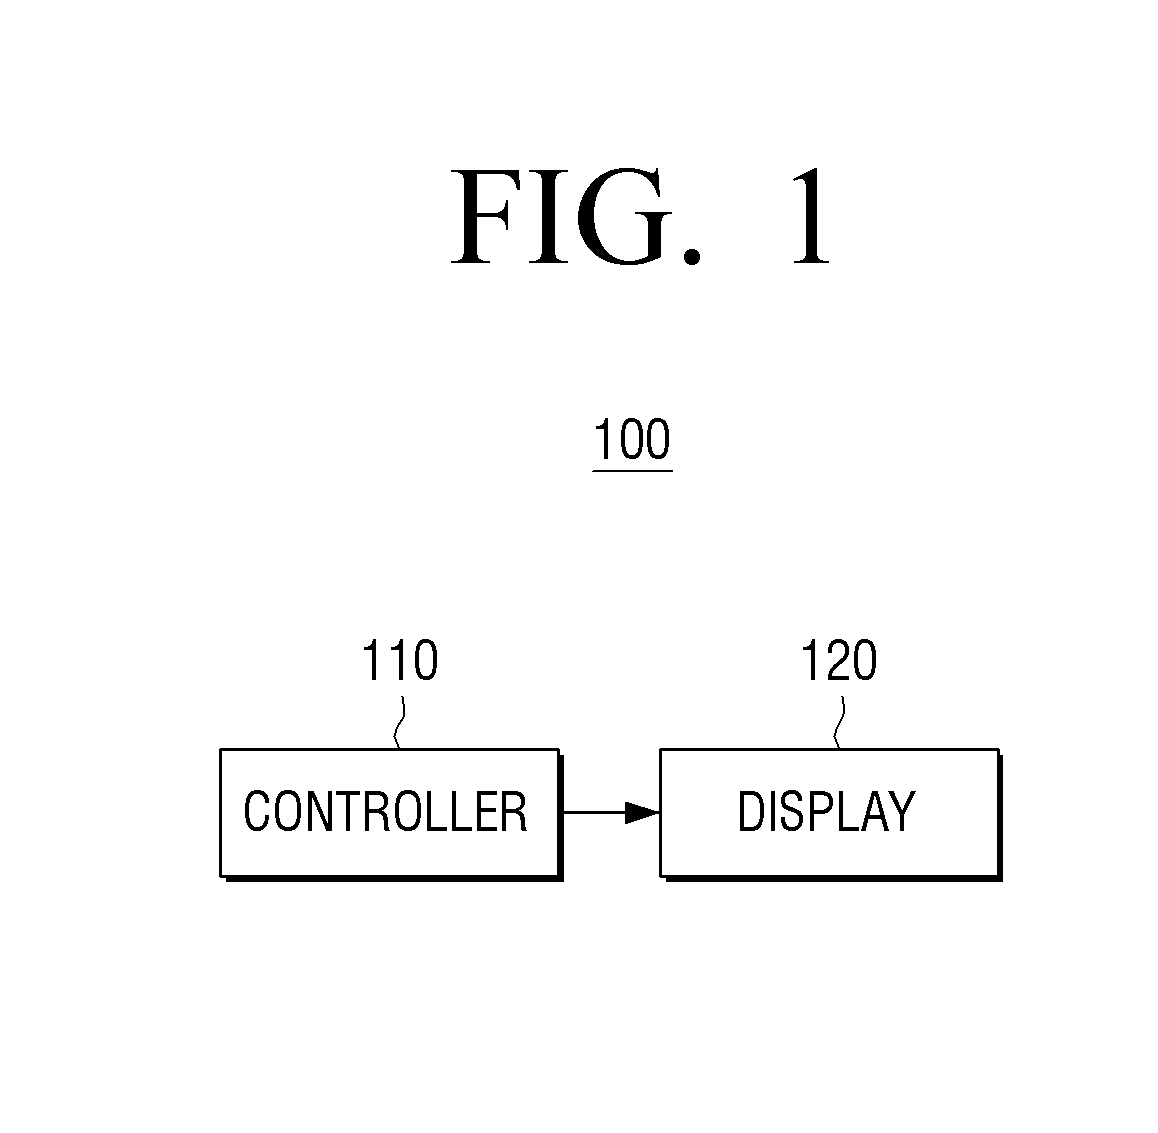 Display apparatus and control method for reducing image sticking